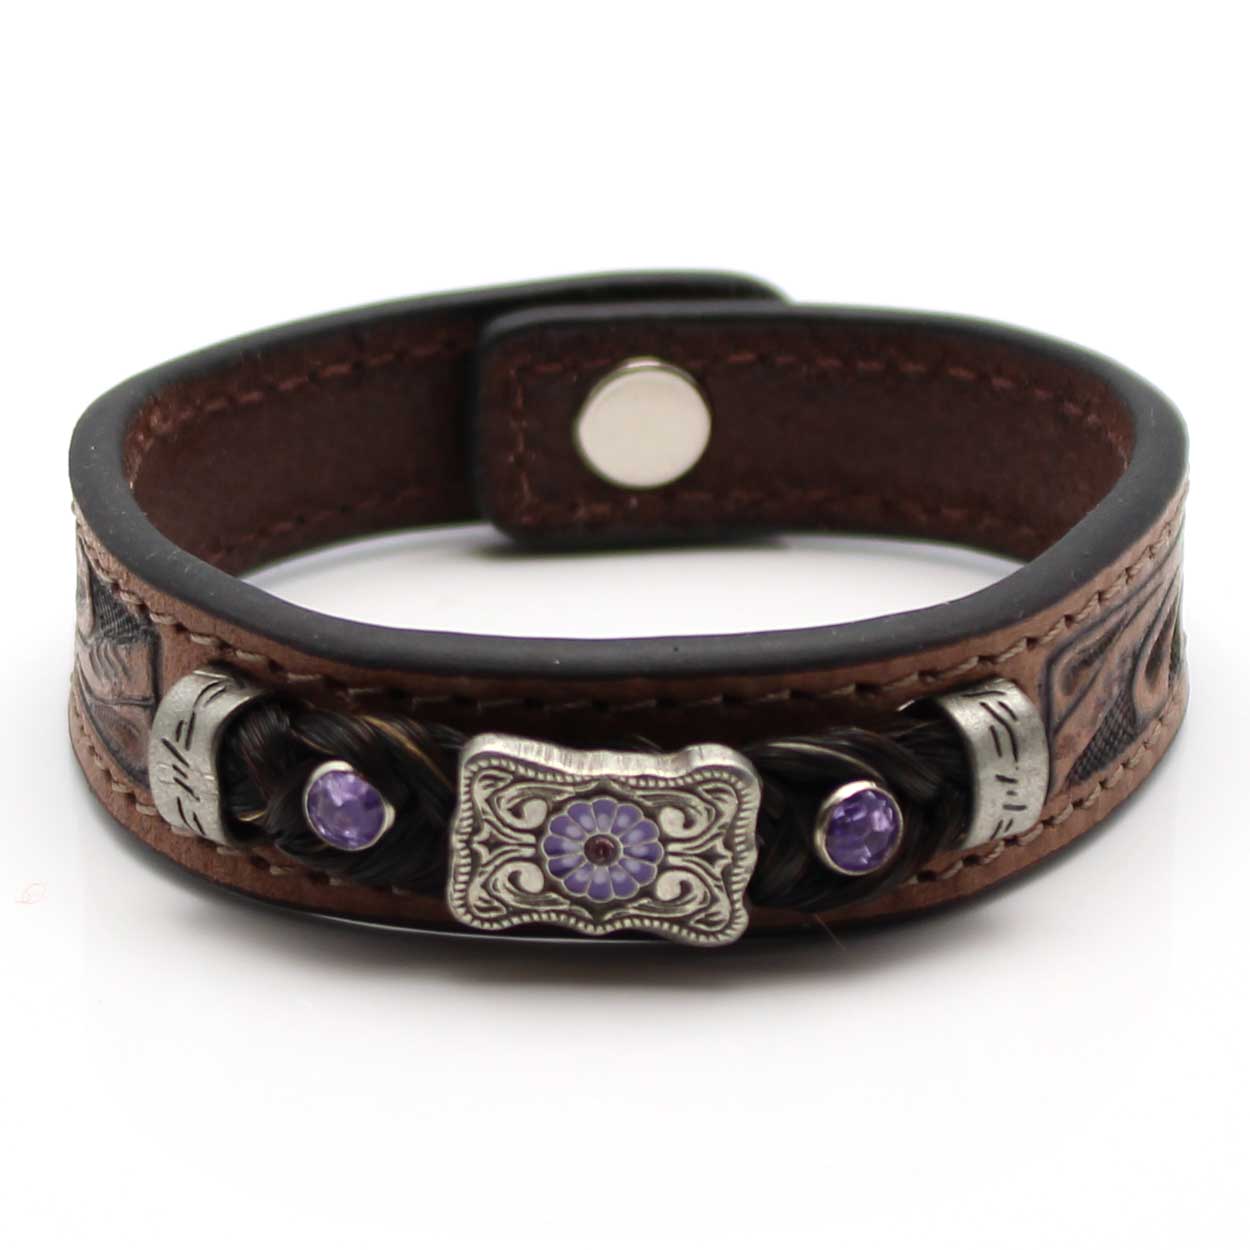 Stamped Leather & Black Horse Hair Bracelet With Metal Accents - Lilac